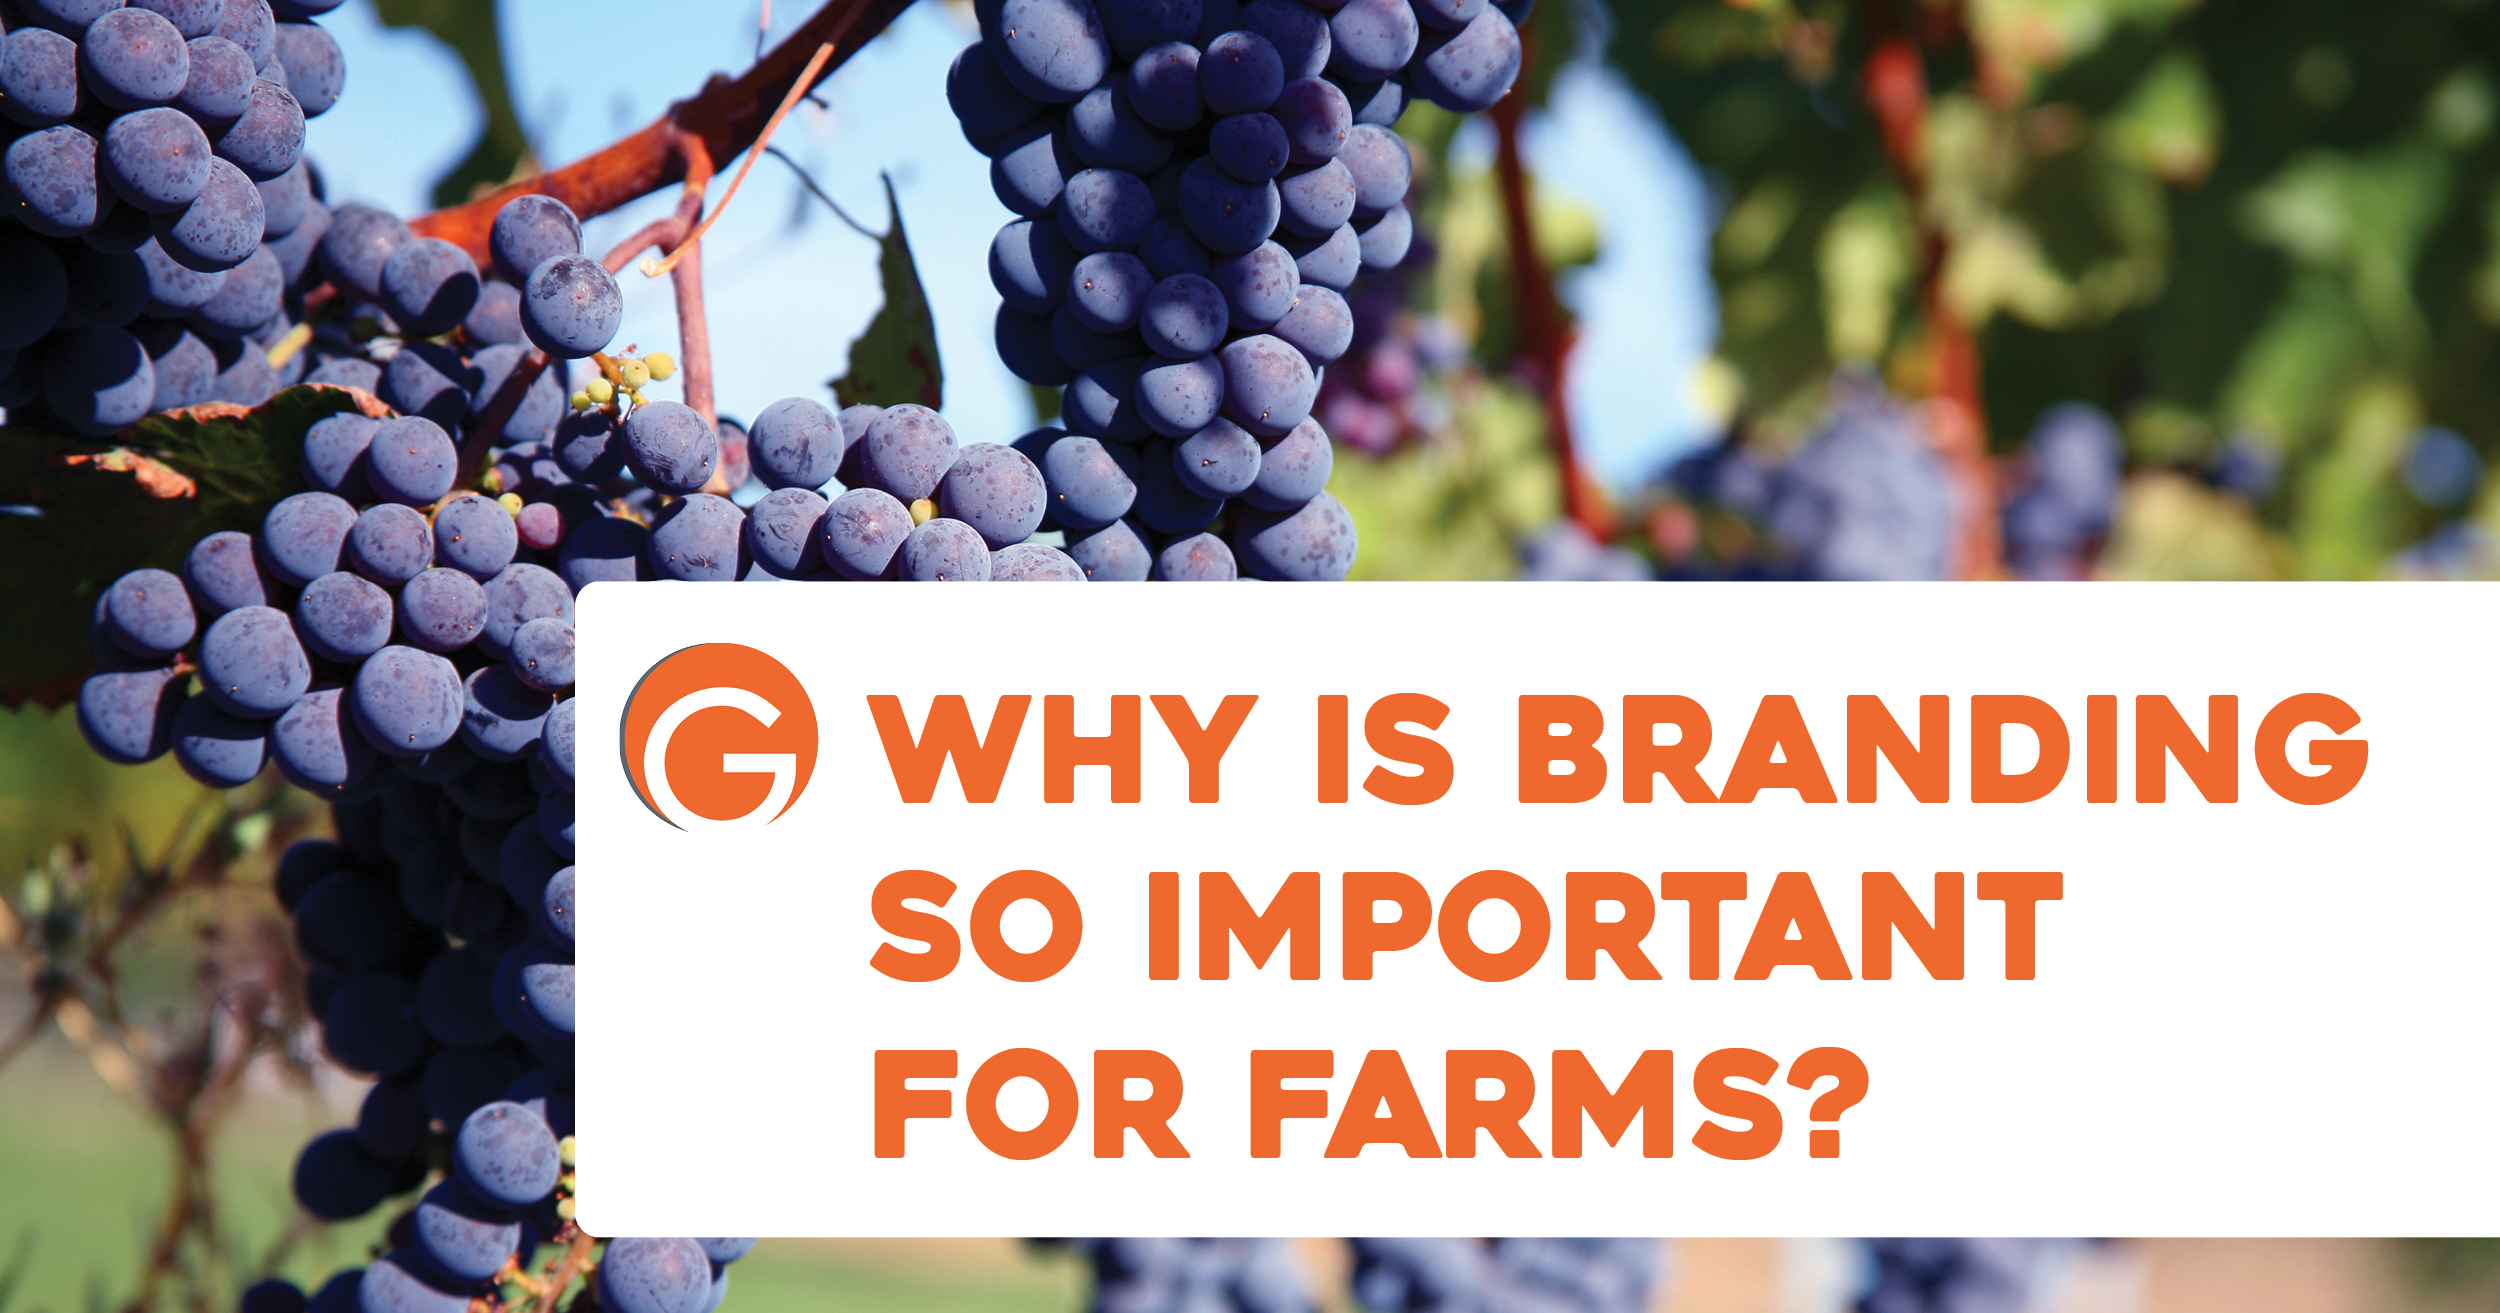 Why is branding so important for farms?